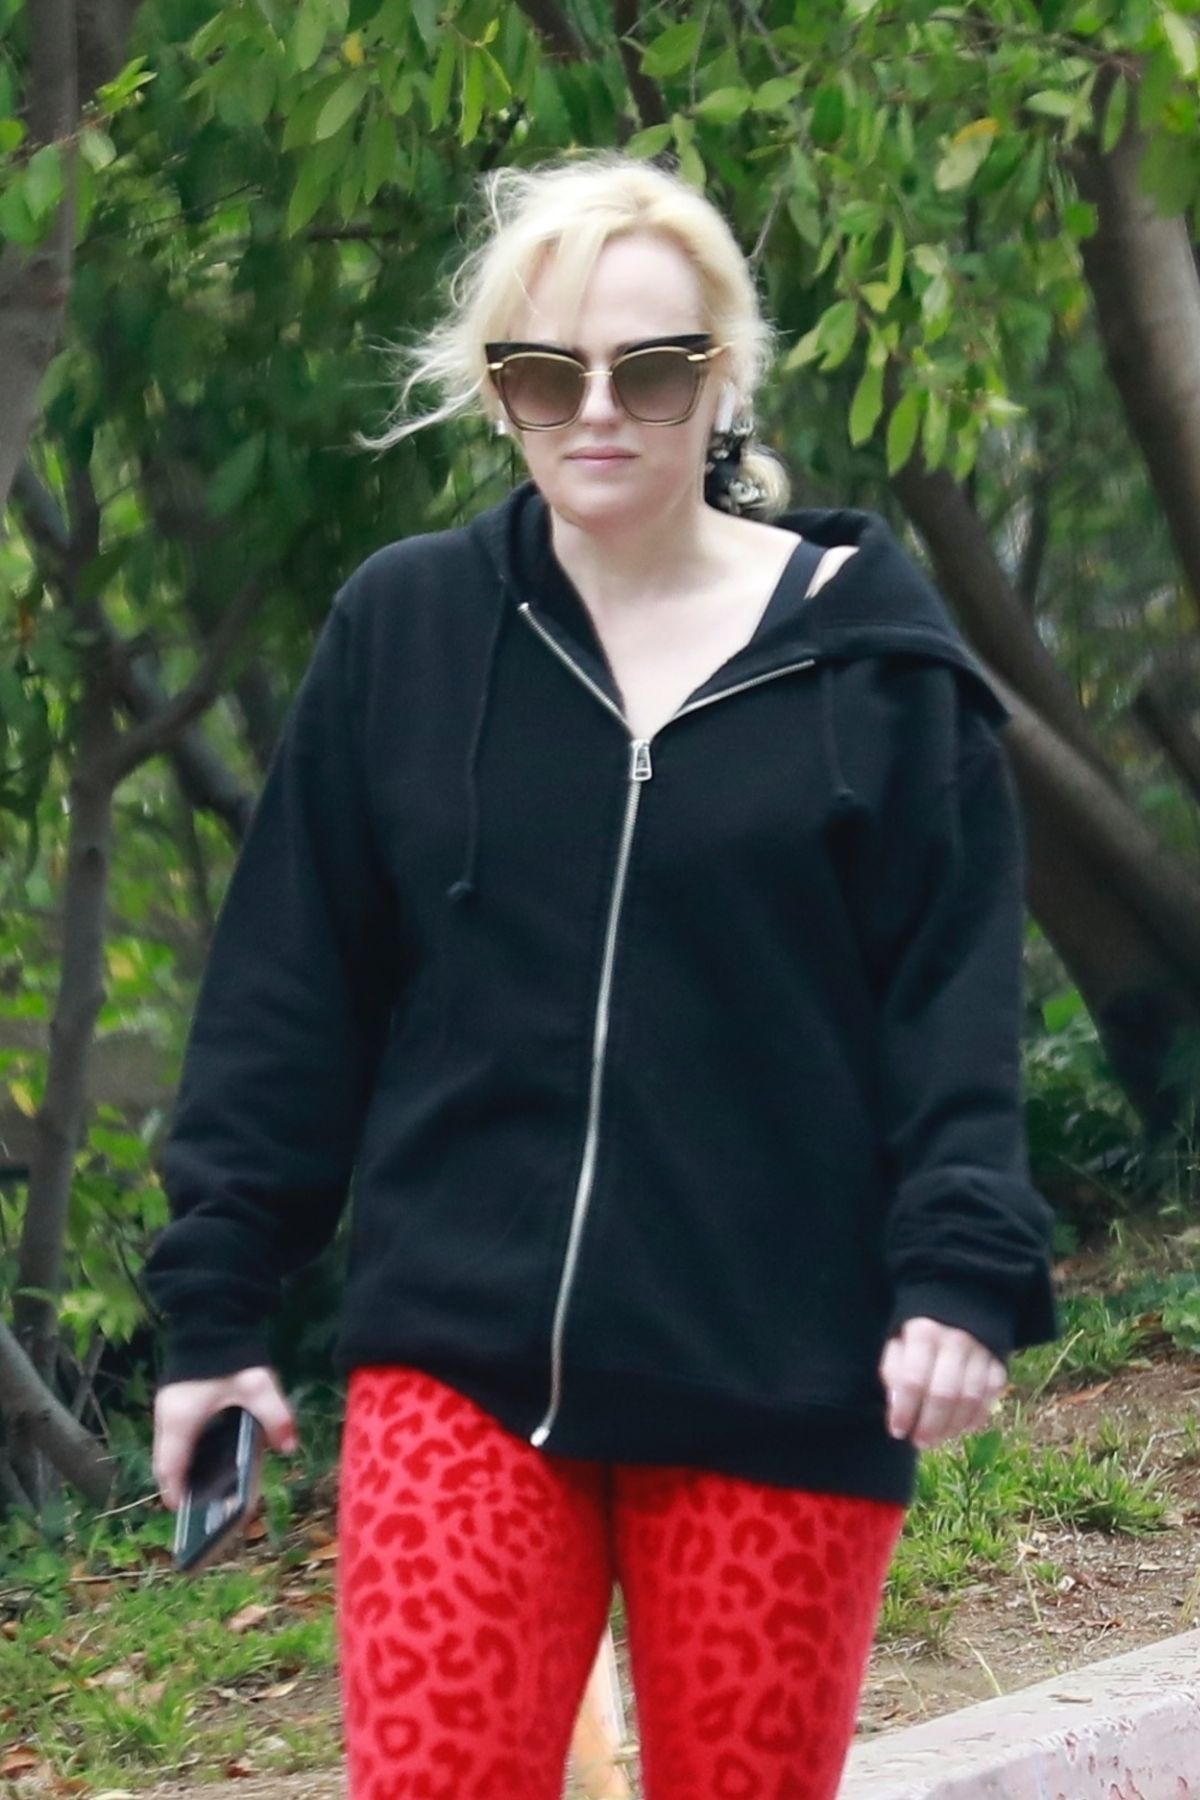 REBEL WILSON Out Hikinig at Griffith Park 05/17/2021 – HawtCelebs